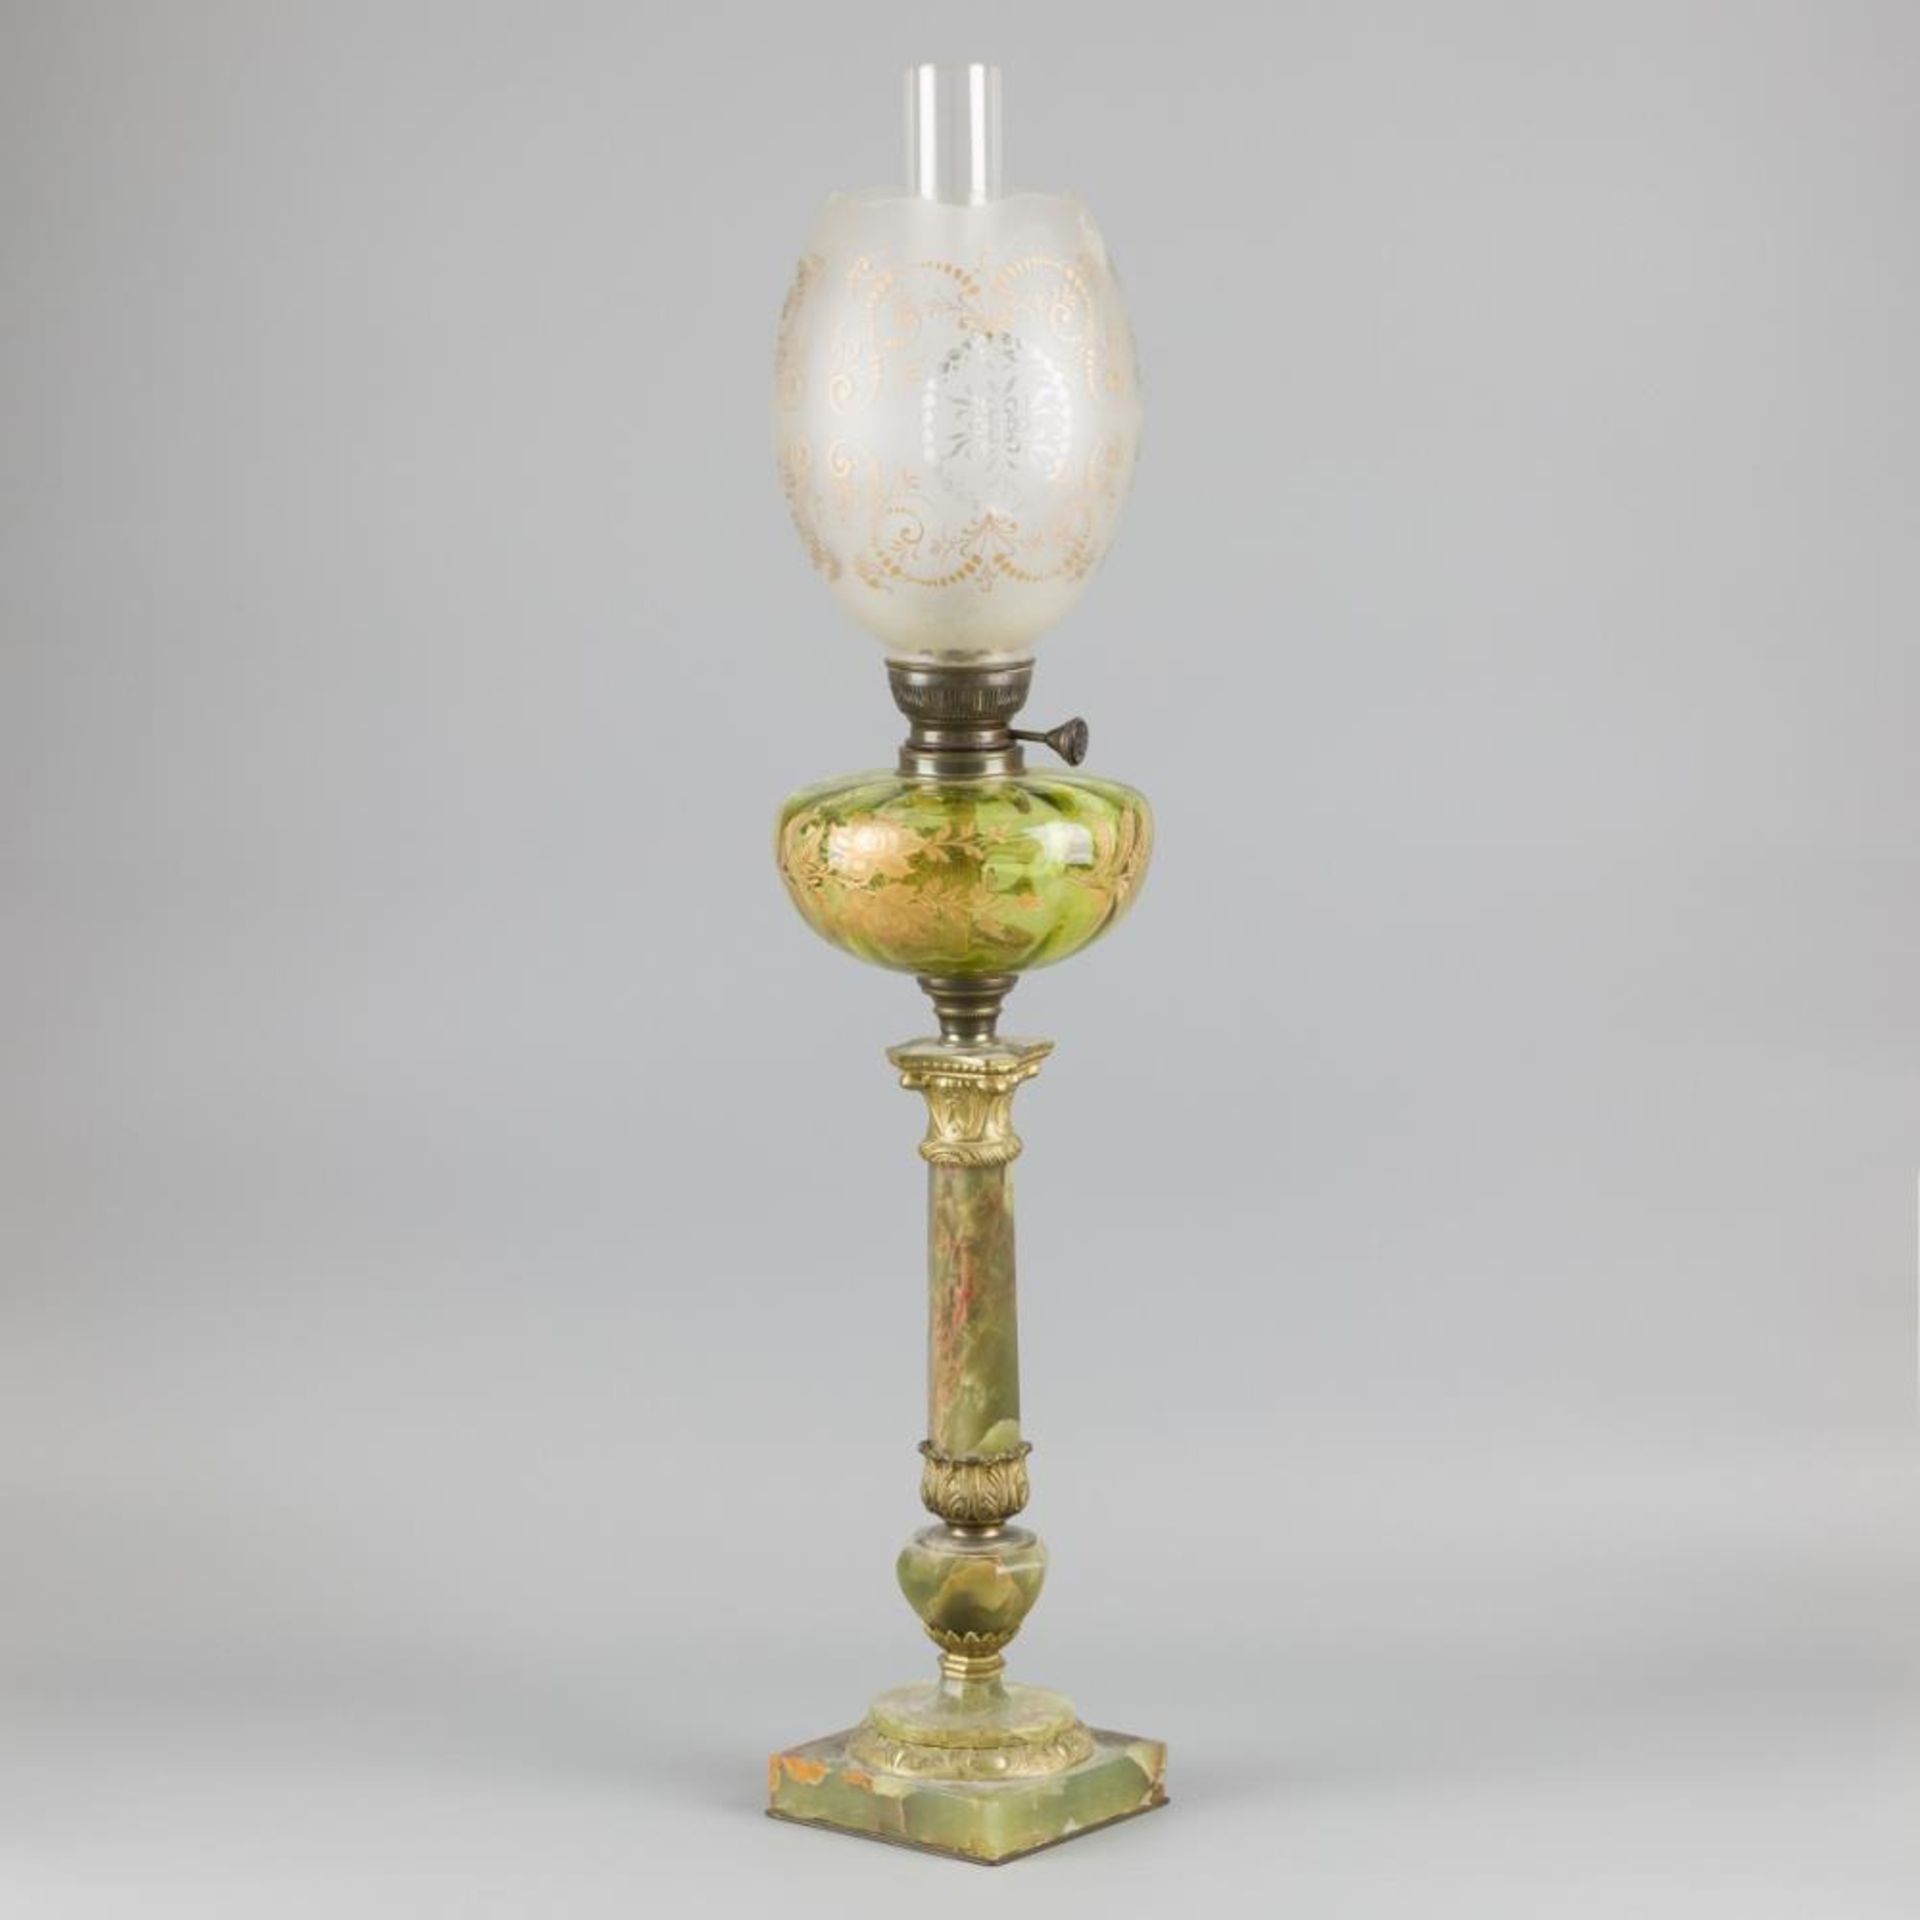 A notary- / oillamp with shade, 1st half 20th century.